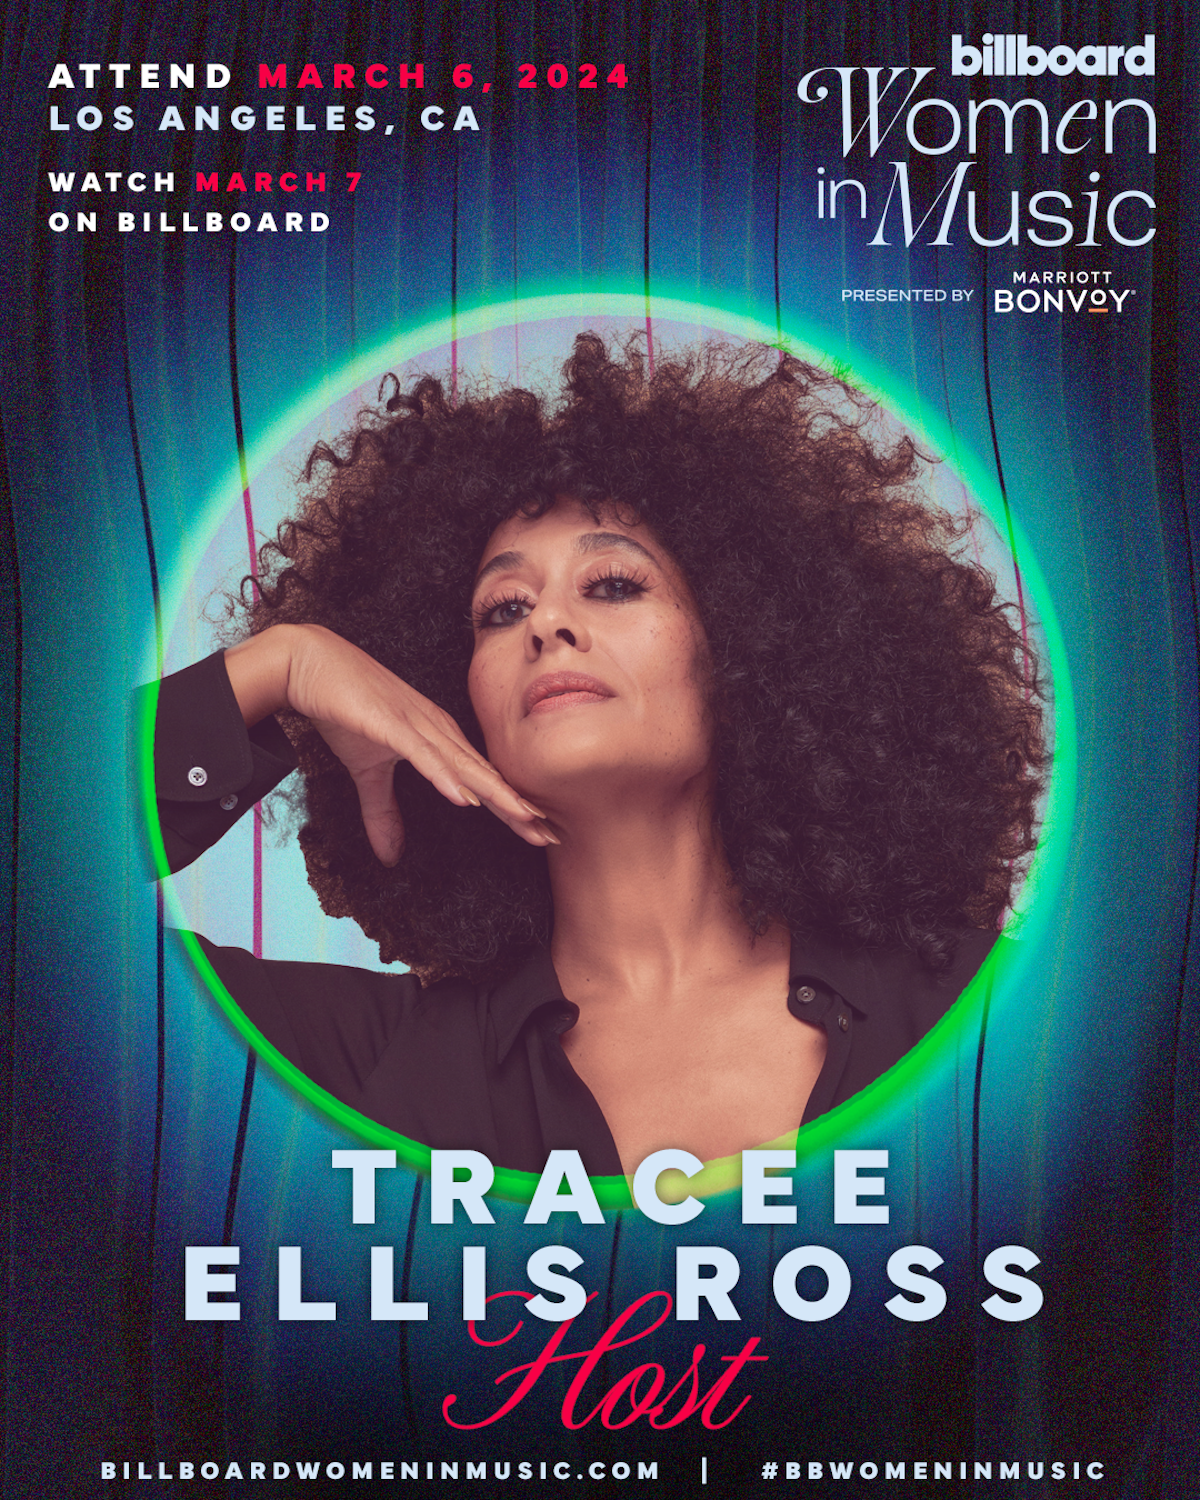 Billboard Women in Music Awards Announced Special Host Tracee Ellis Ross & Honorees Victoria Monét, Ice Spice & More